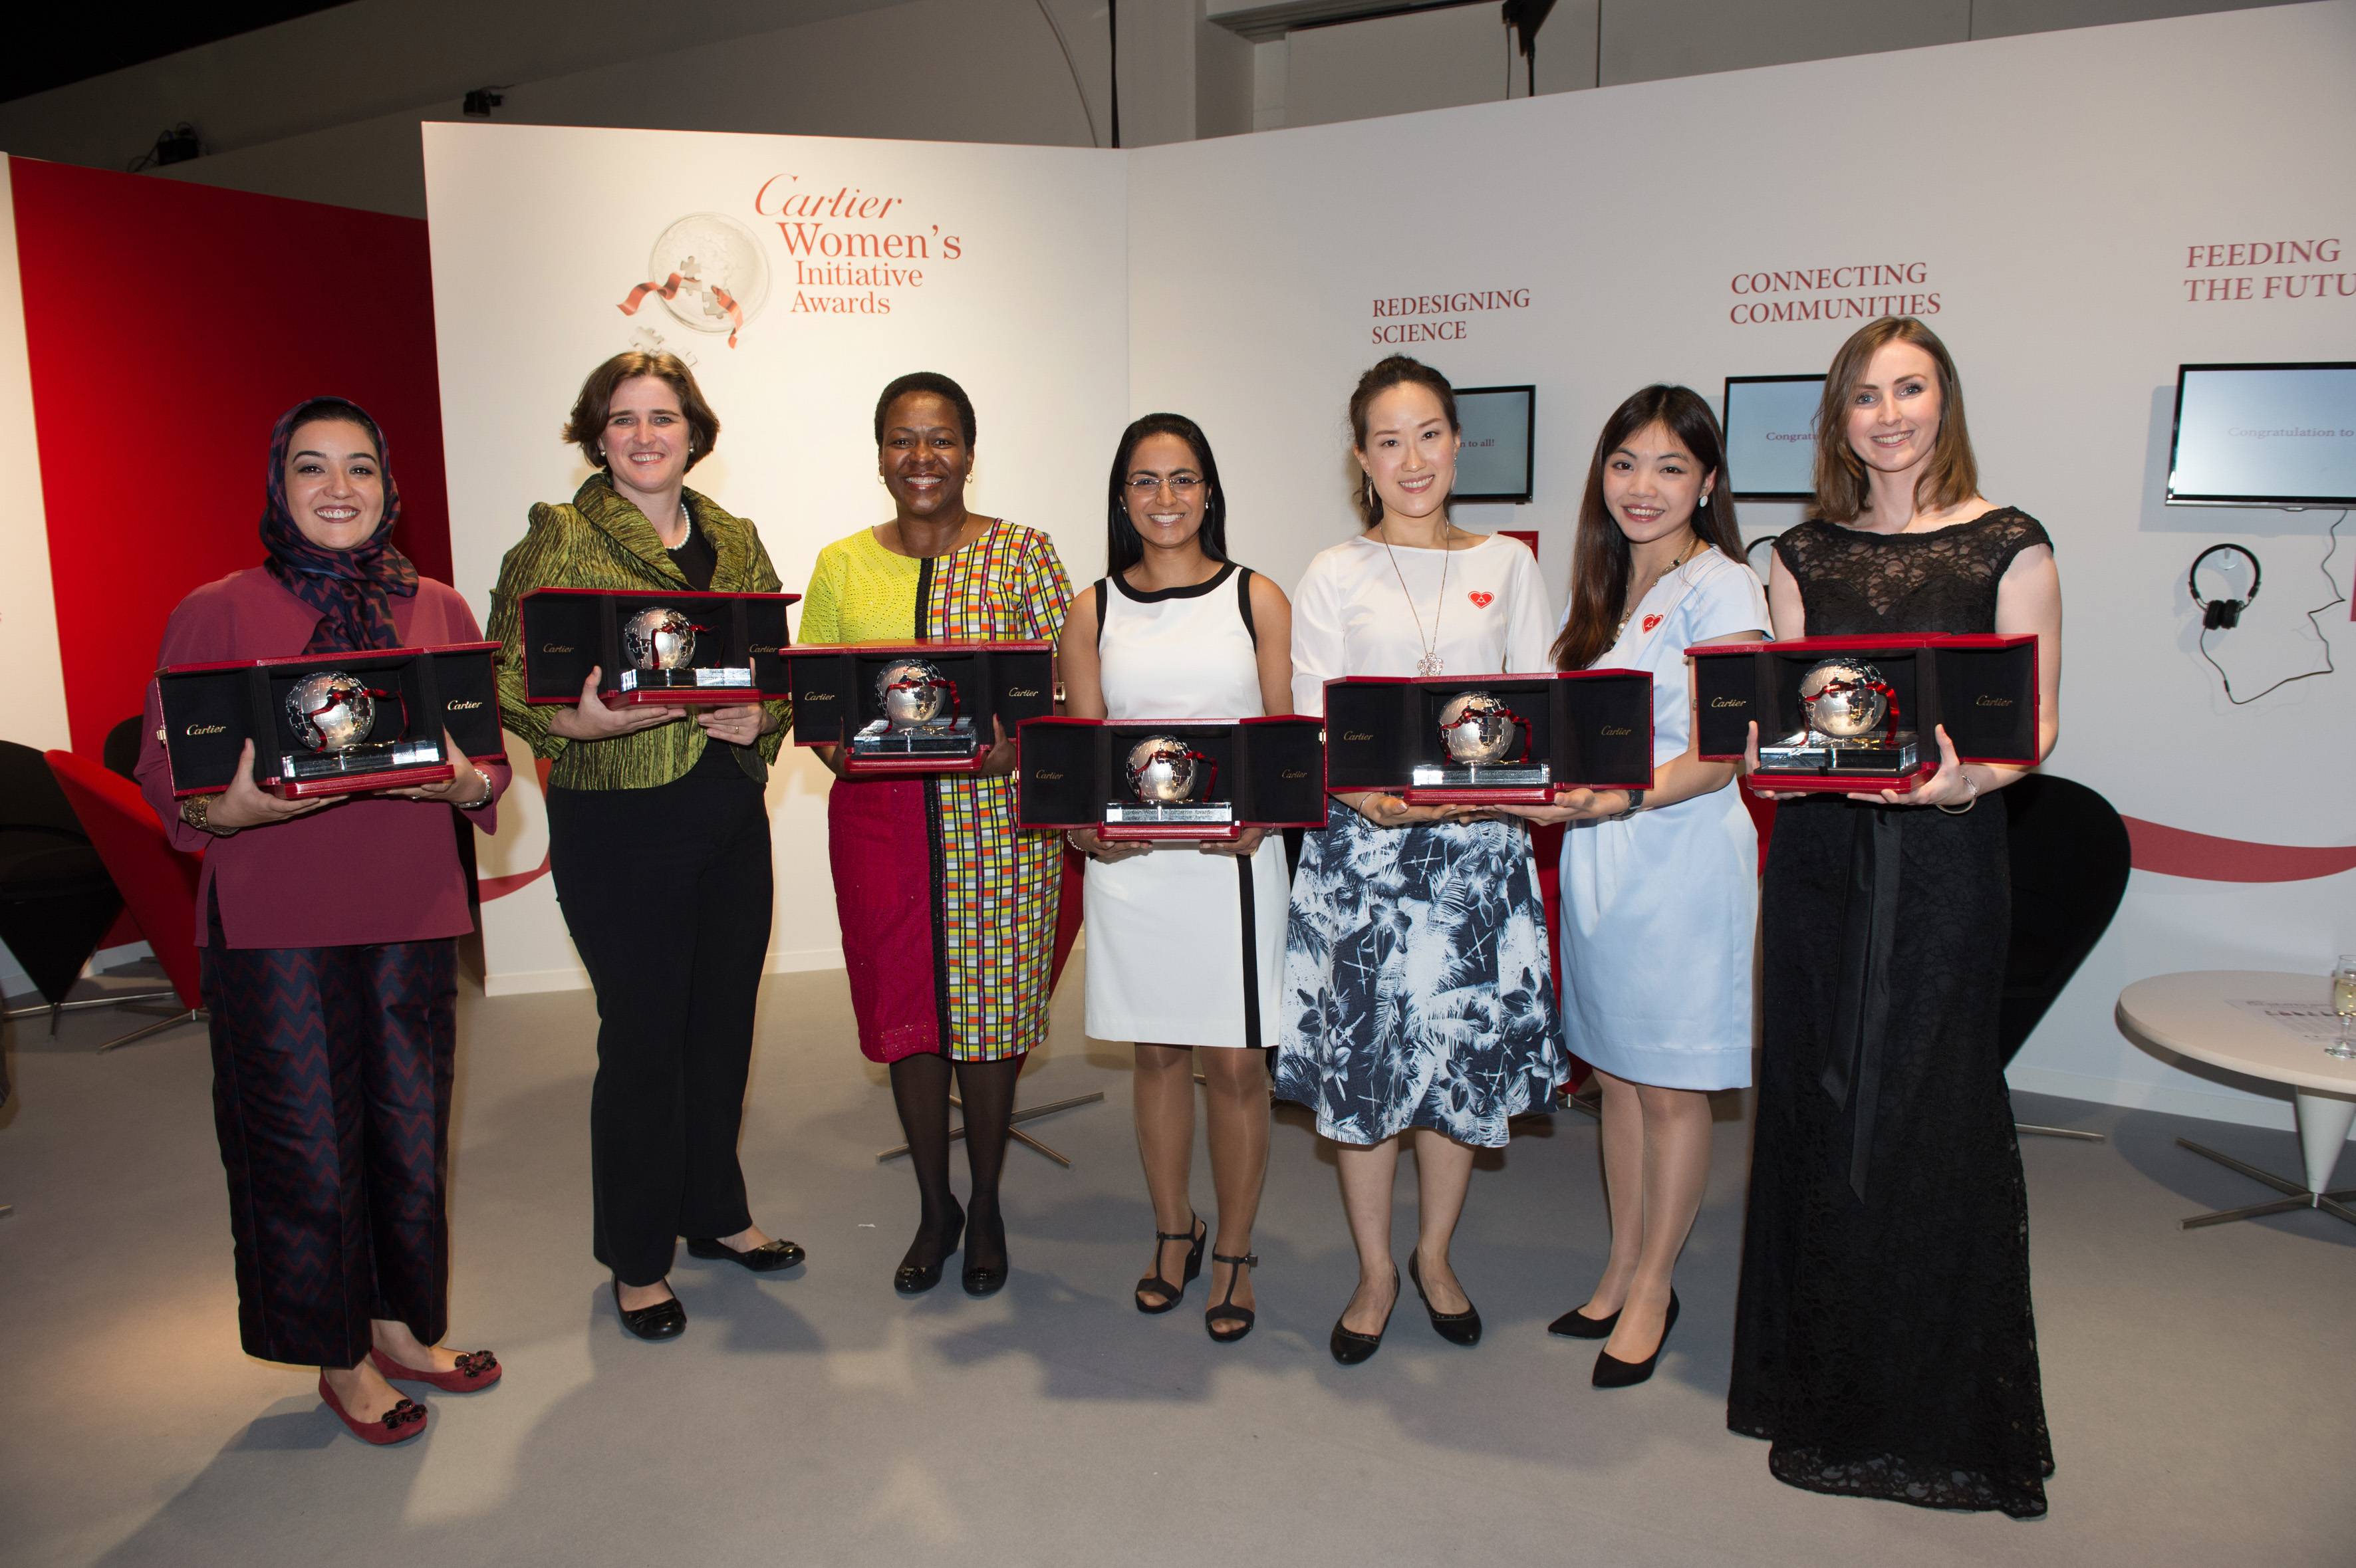 Cartier shares the spotlight with women entrepreneurs at the 9th Cartier Women’s Initiative Awards ceremony in Deauville, France